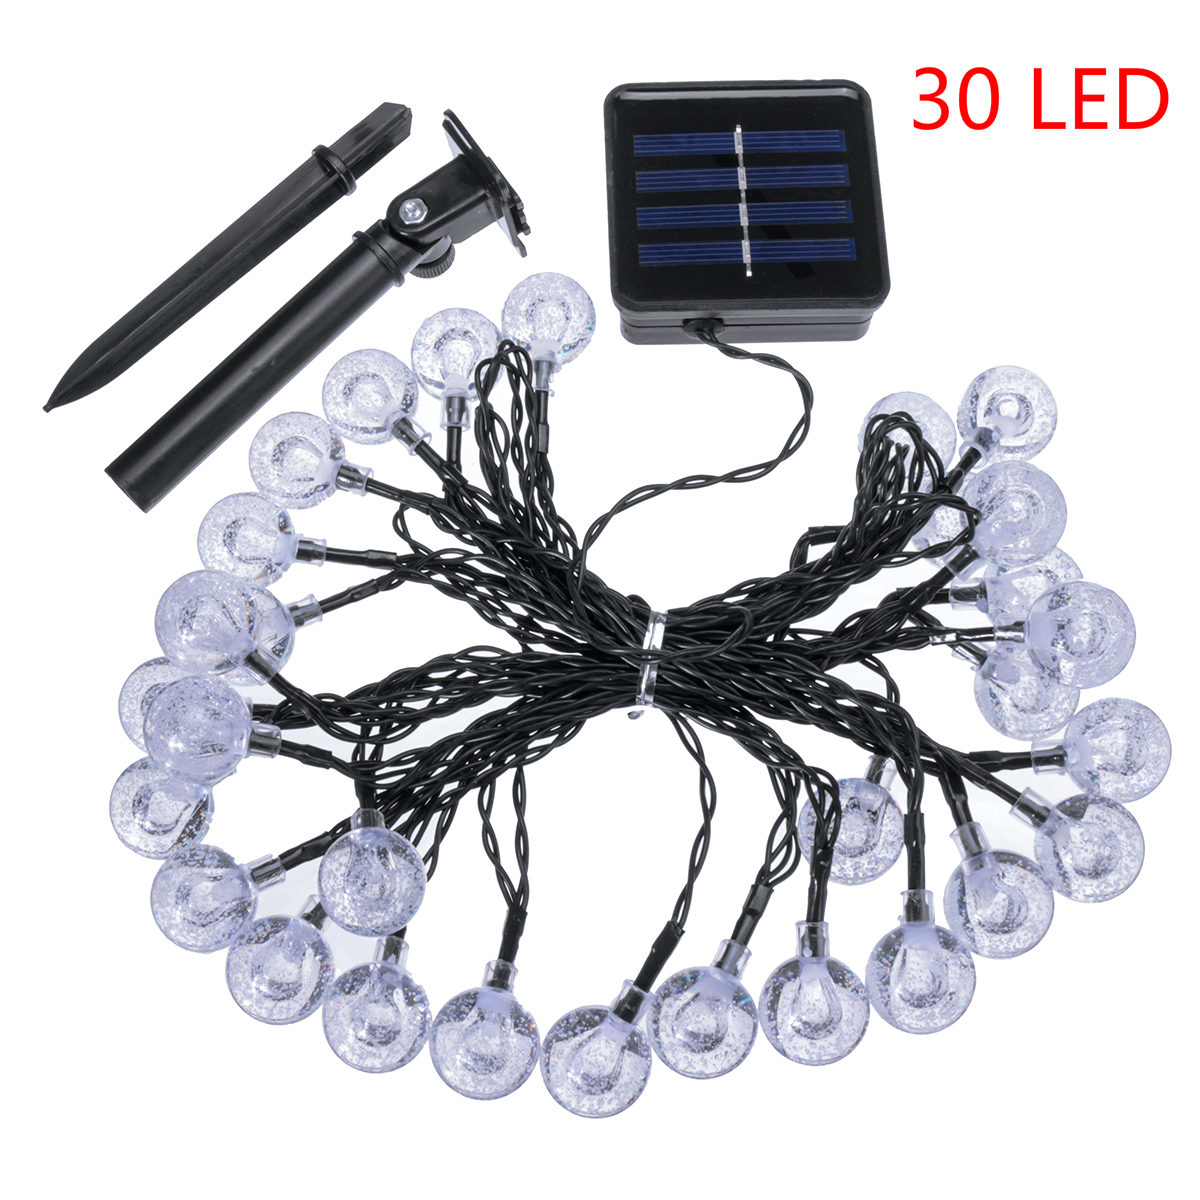 65M-30-LED-Solar-String-Ball-Lights-Outdoor-Waterproof-Warm-White-Garden-Christmas-Tree-Decorations--1672120-11